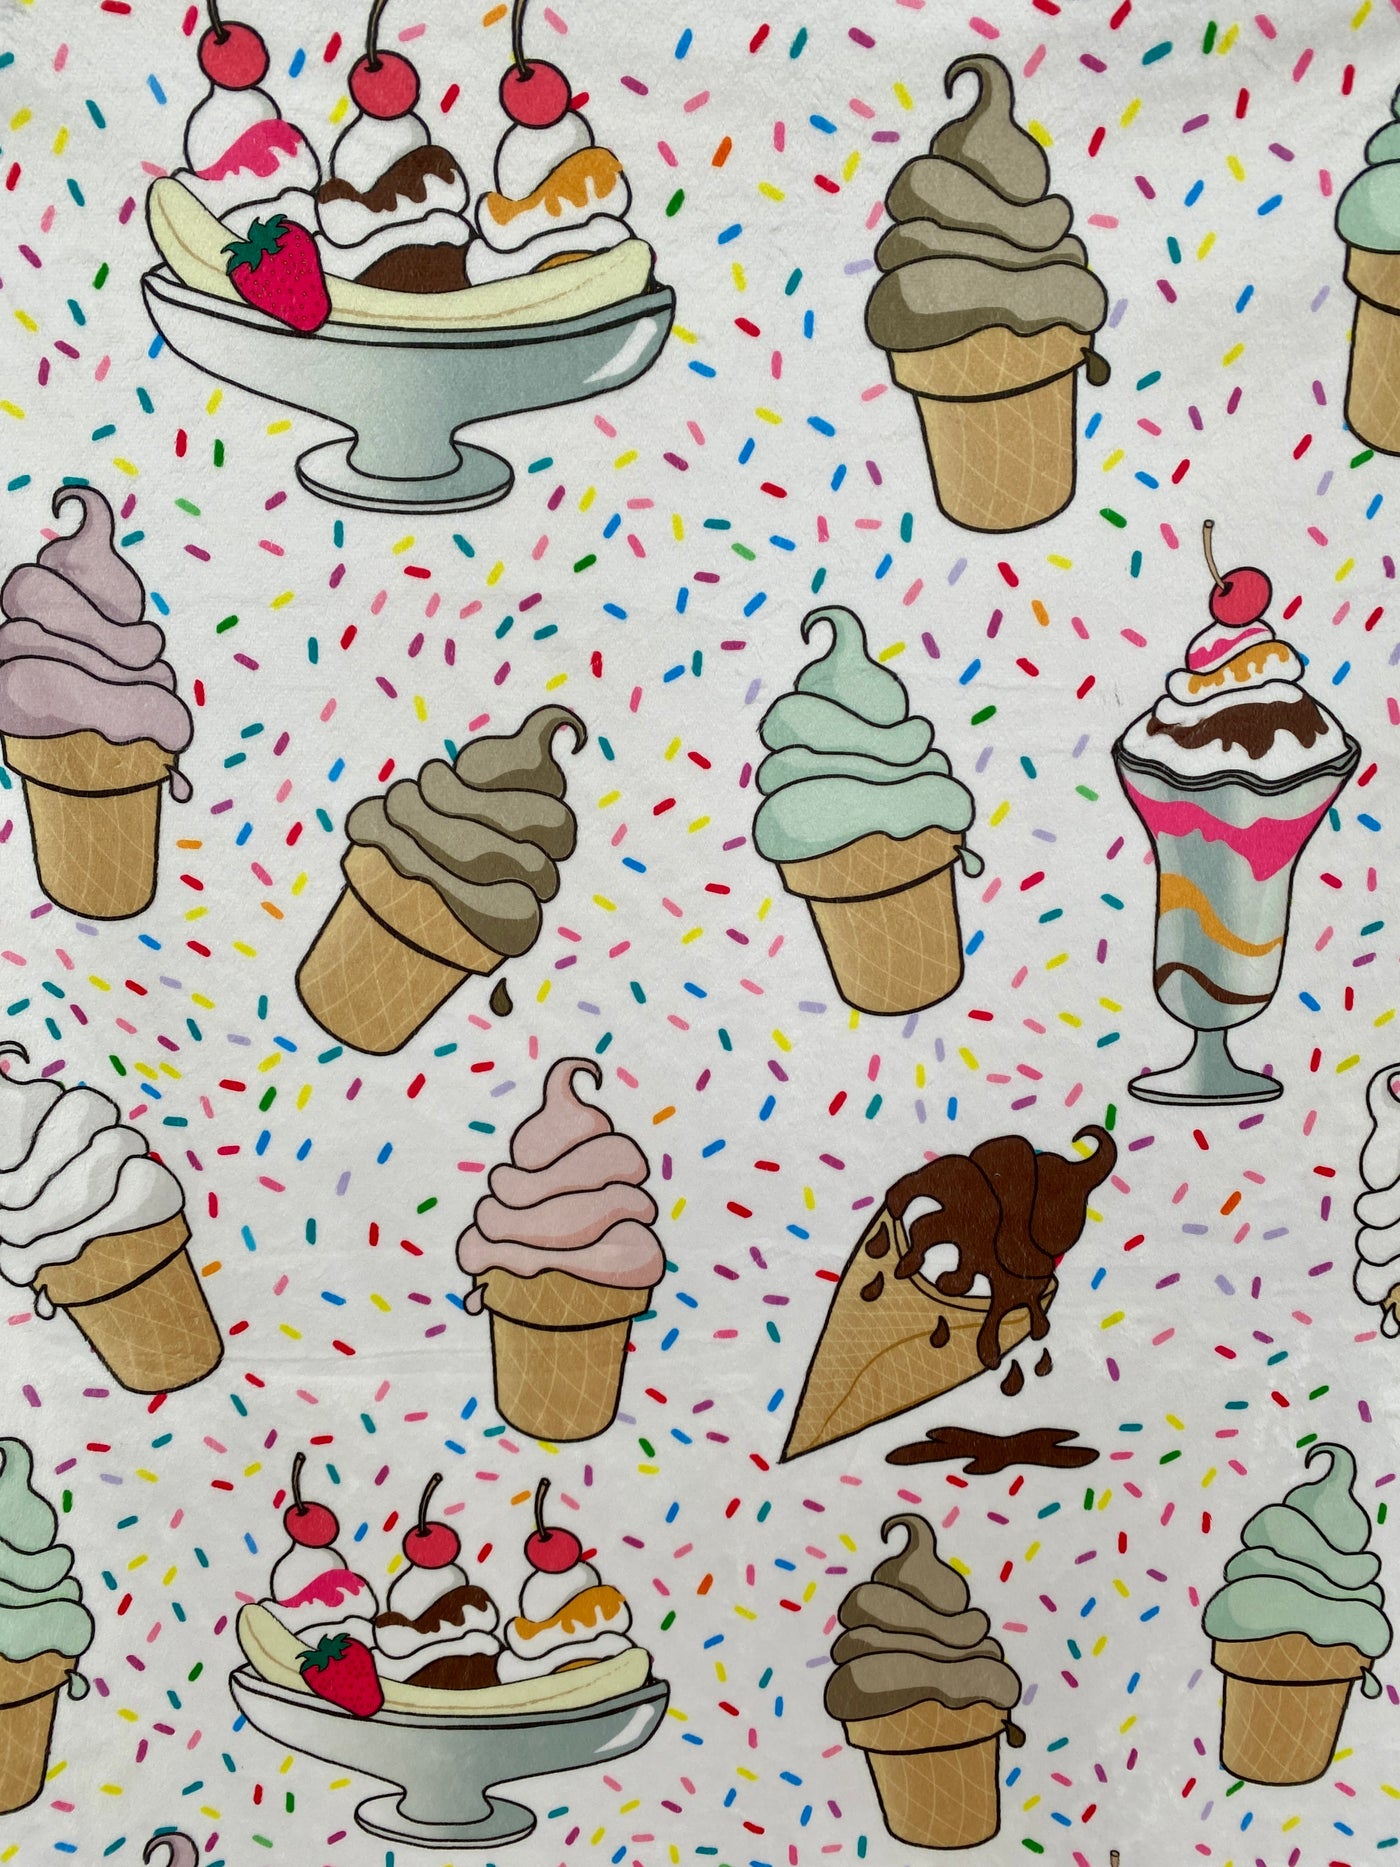 Baby blanket: Pastel colored ice creams